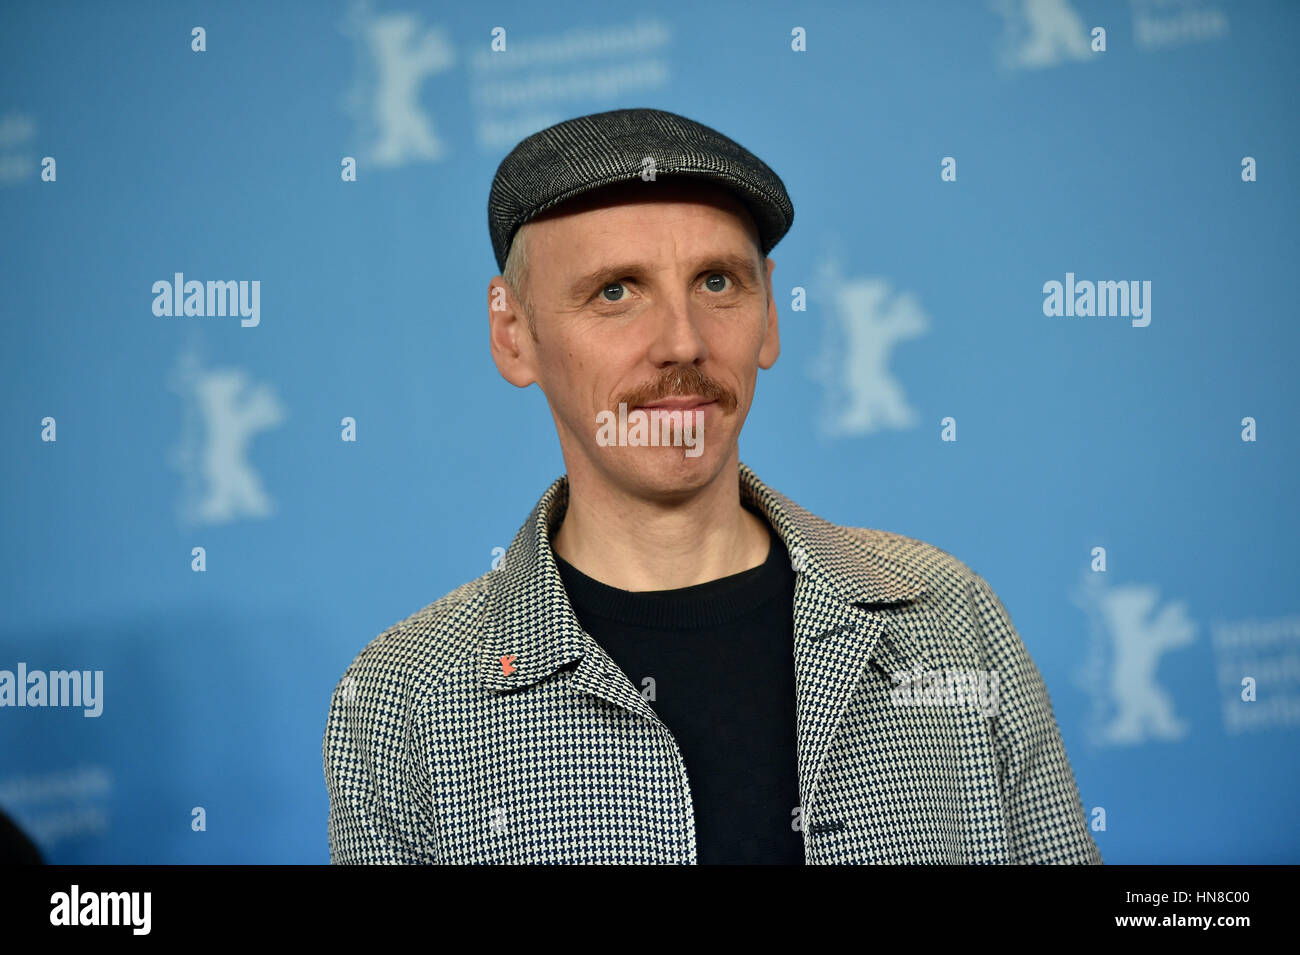 Berlin, Germany. 10th Feb, 2017. Actor Ewen Bremner at the 67th International Berlin Film Festival for the premiere of the nominated British film 'T2 Trainspotting' in Berlin, Germany, 10 February 2017. Photo: Britta Pedersen/dpa-Zentralbild/dpa/Alamy Live News Stock Photo